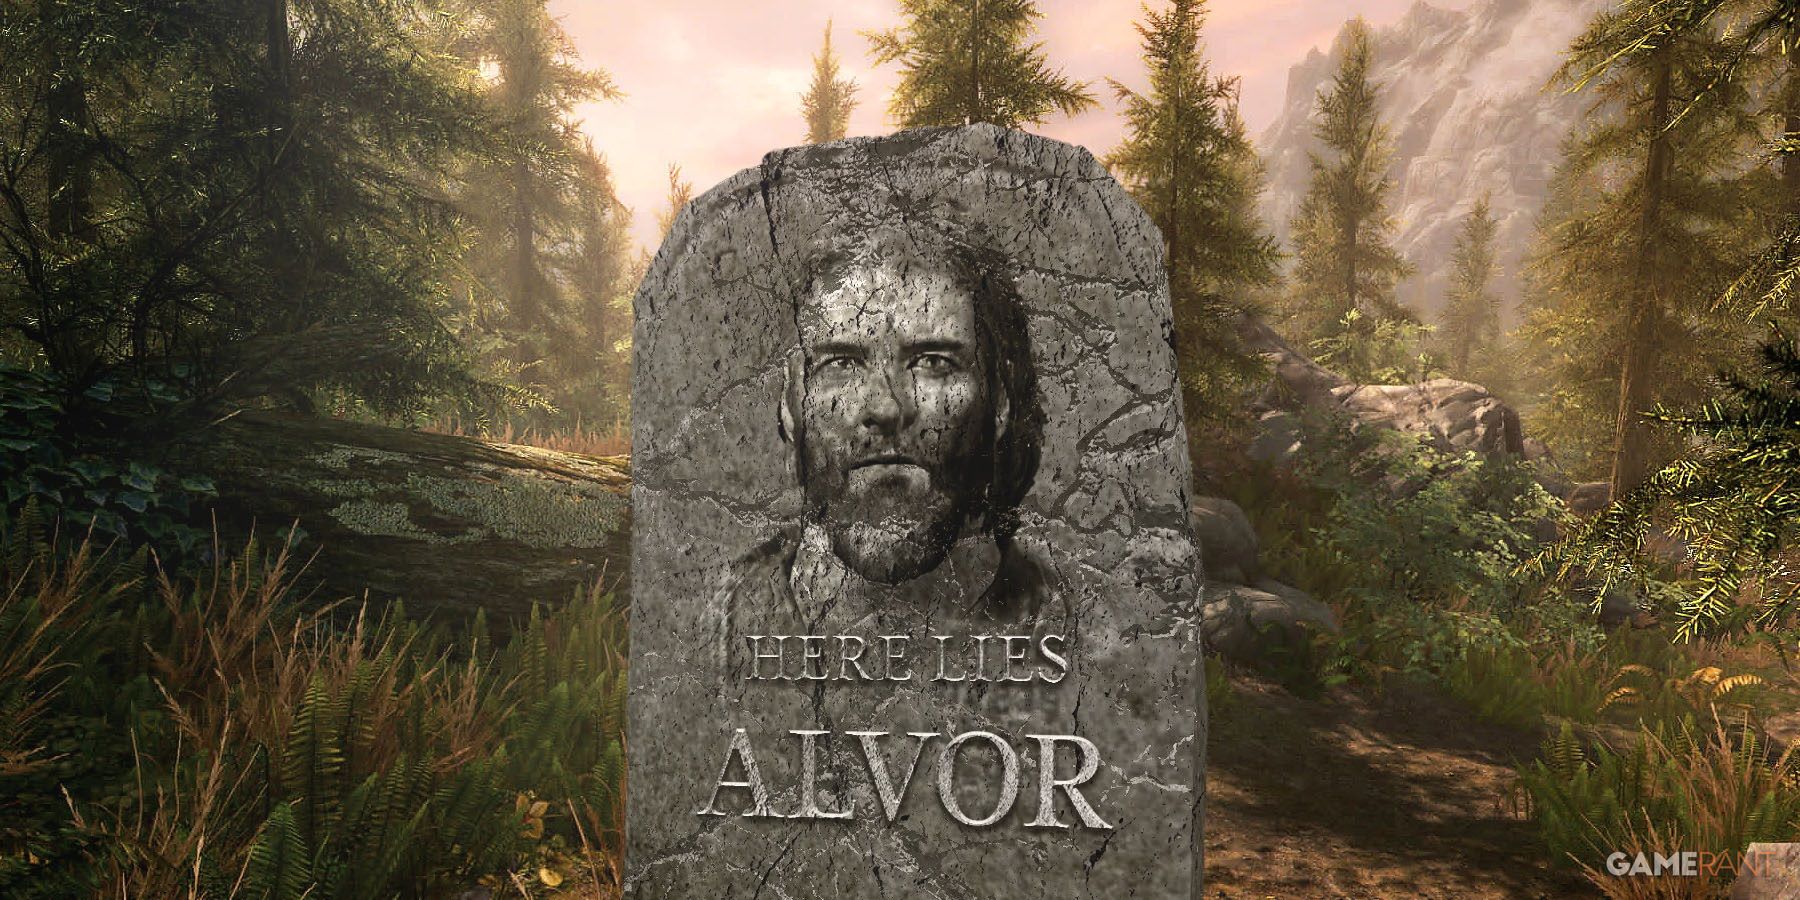 Image from Skyrim showing Alvor's face carved into a gravestone.